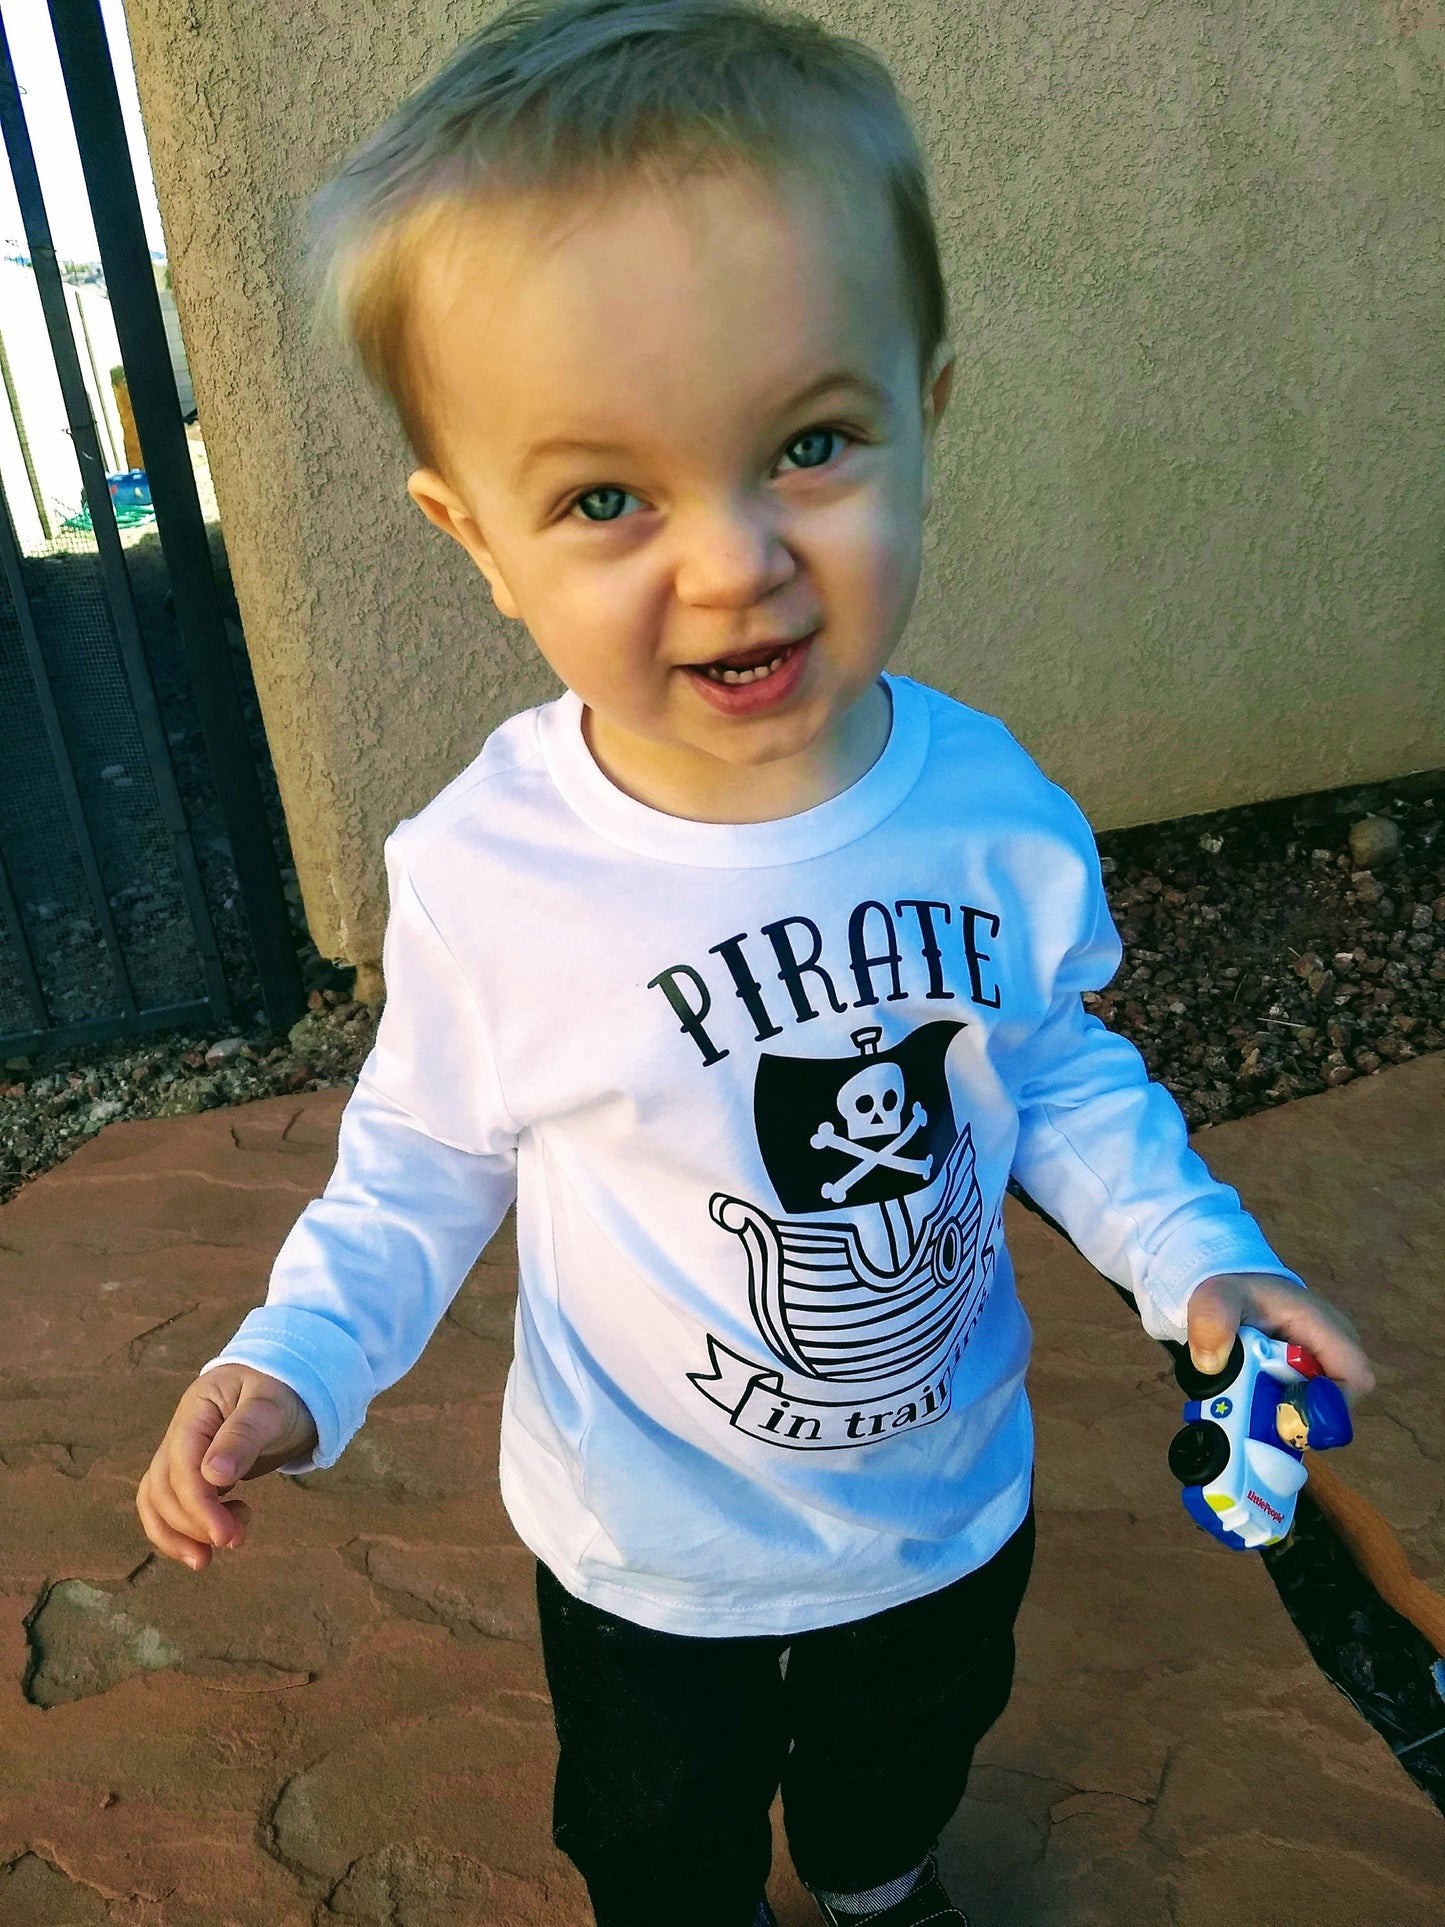 Pirate in Training Infant or Toddler Shirt or Bodysuit - Cute Toddler Shirt - pirate birthday shirt - pirate party shirt - toddler boy shirt